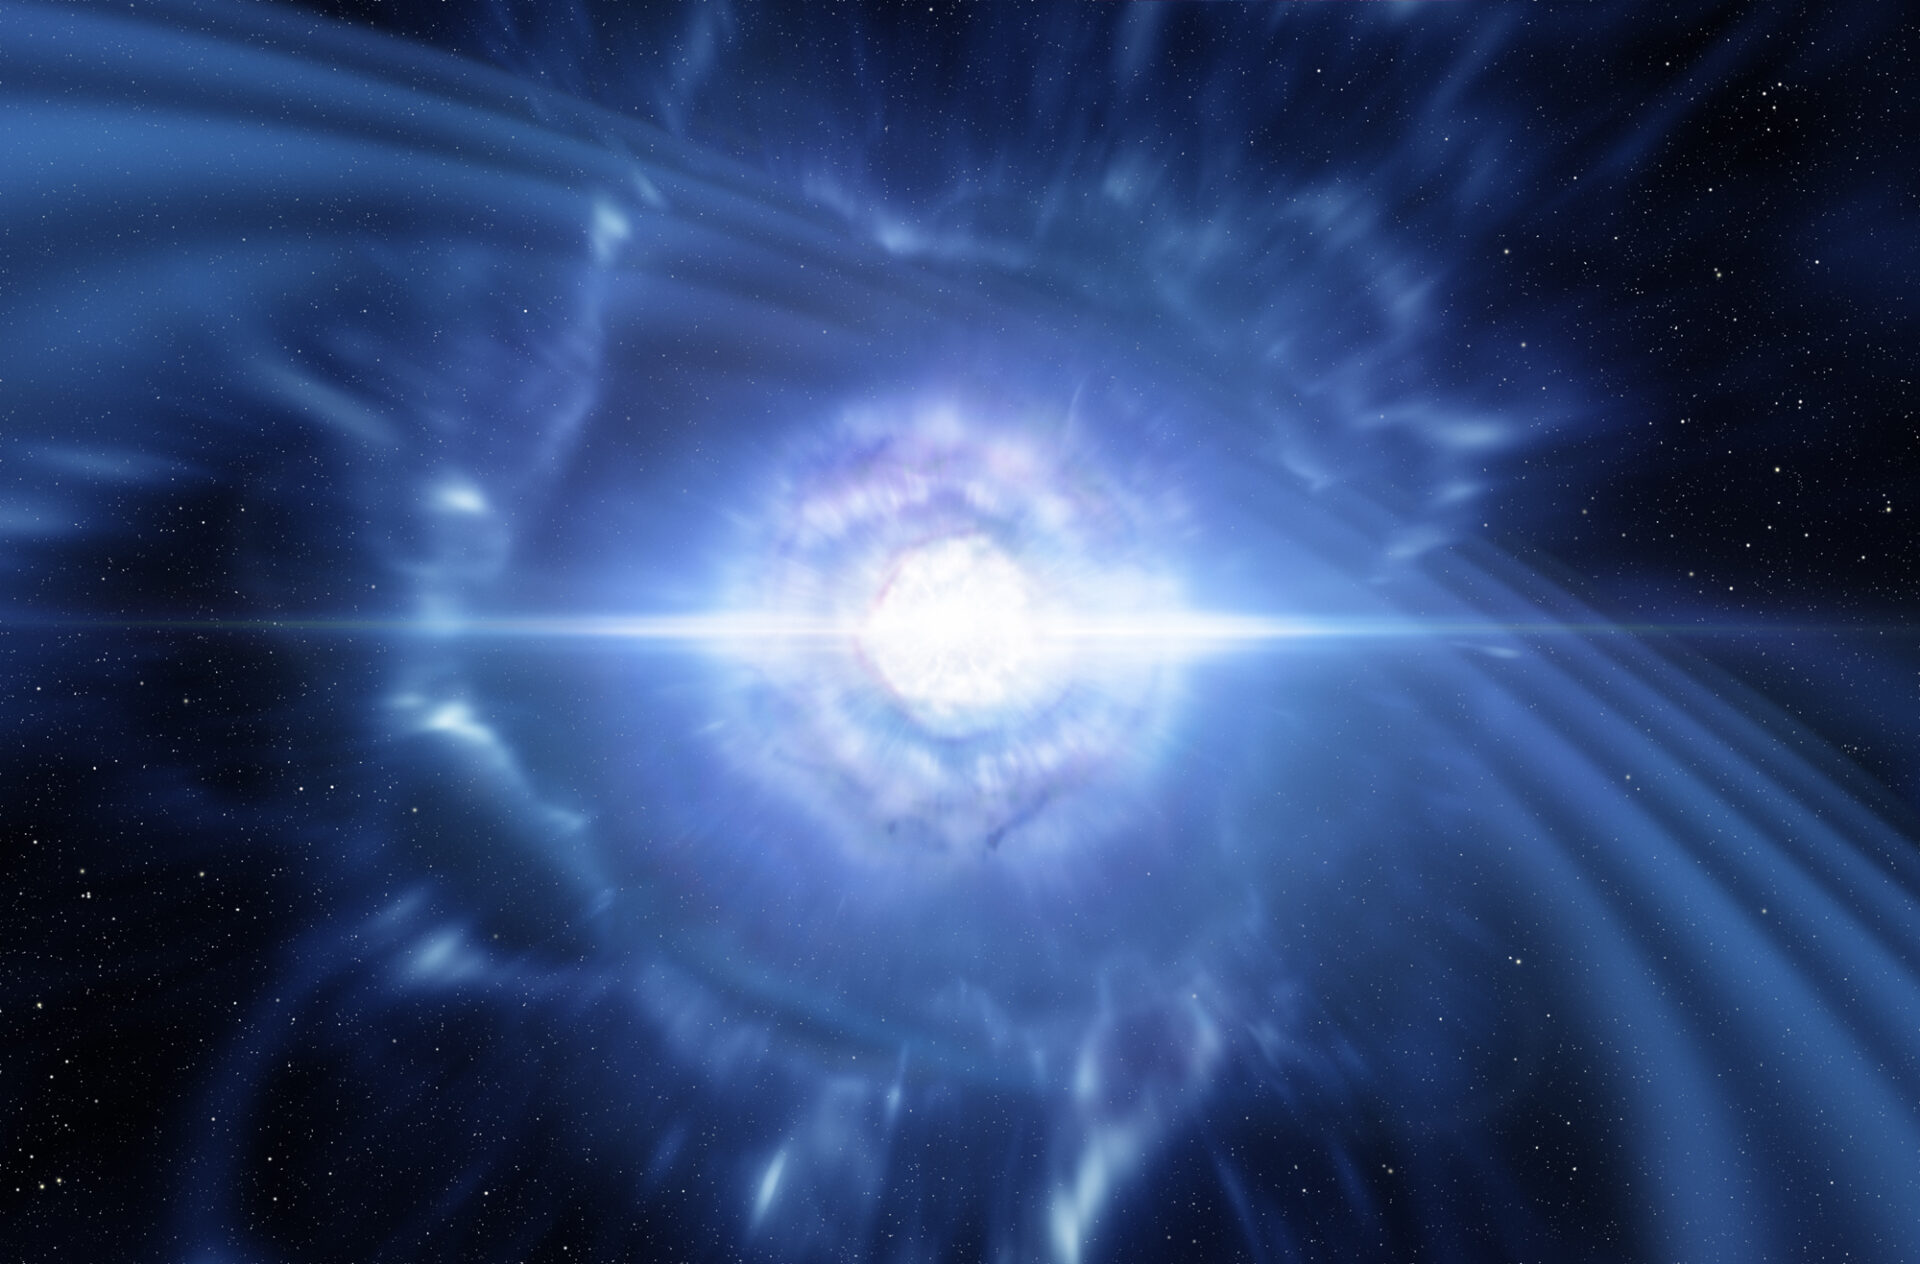 <p>This artist’s impression shows two tiny but very dense neutron stars at the point at which they merge and explode as a kilonova. Such a very rare event is expected to produce both gravitational waves and a short gamma-ray burst, both of which were observed on 17 August 2017 by LIGO–Virgo and Fermi/INTEGRAL respectively. Subsequent detailed observations with many ESO telescopes confirmed that this object, seen in the galaxy NGC 4993 about 130 million light-years from the Earth, is indeed a kilonova. Such objects are the main source of very heavy chemical elements, such as gold and platinum, in the Universe.</p>
<p>Credit: ESO/L. Calçada/M. Kornmesser</p>
